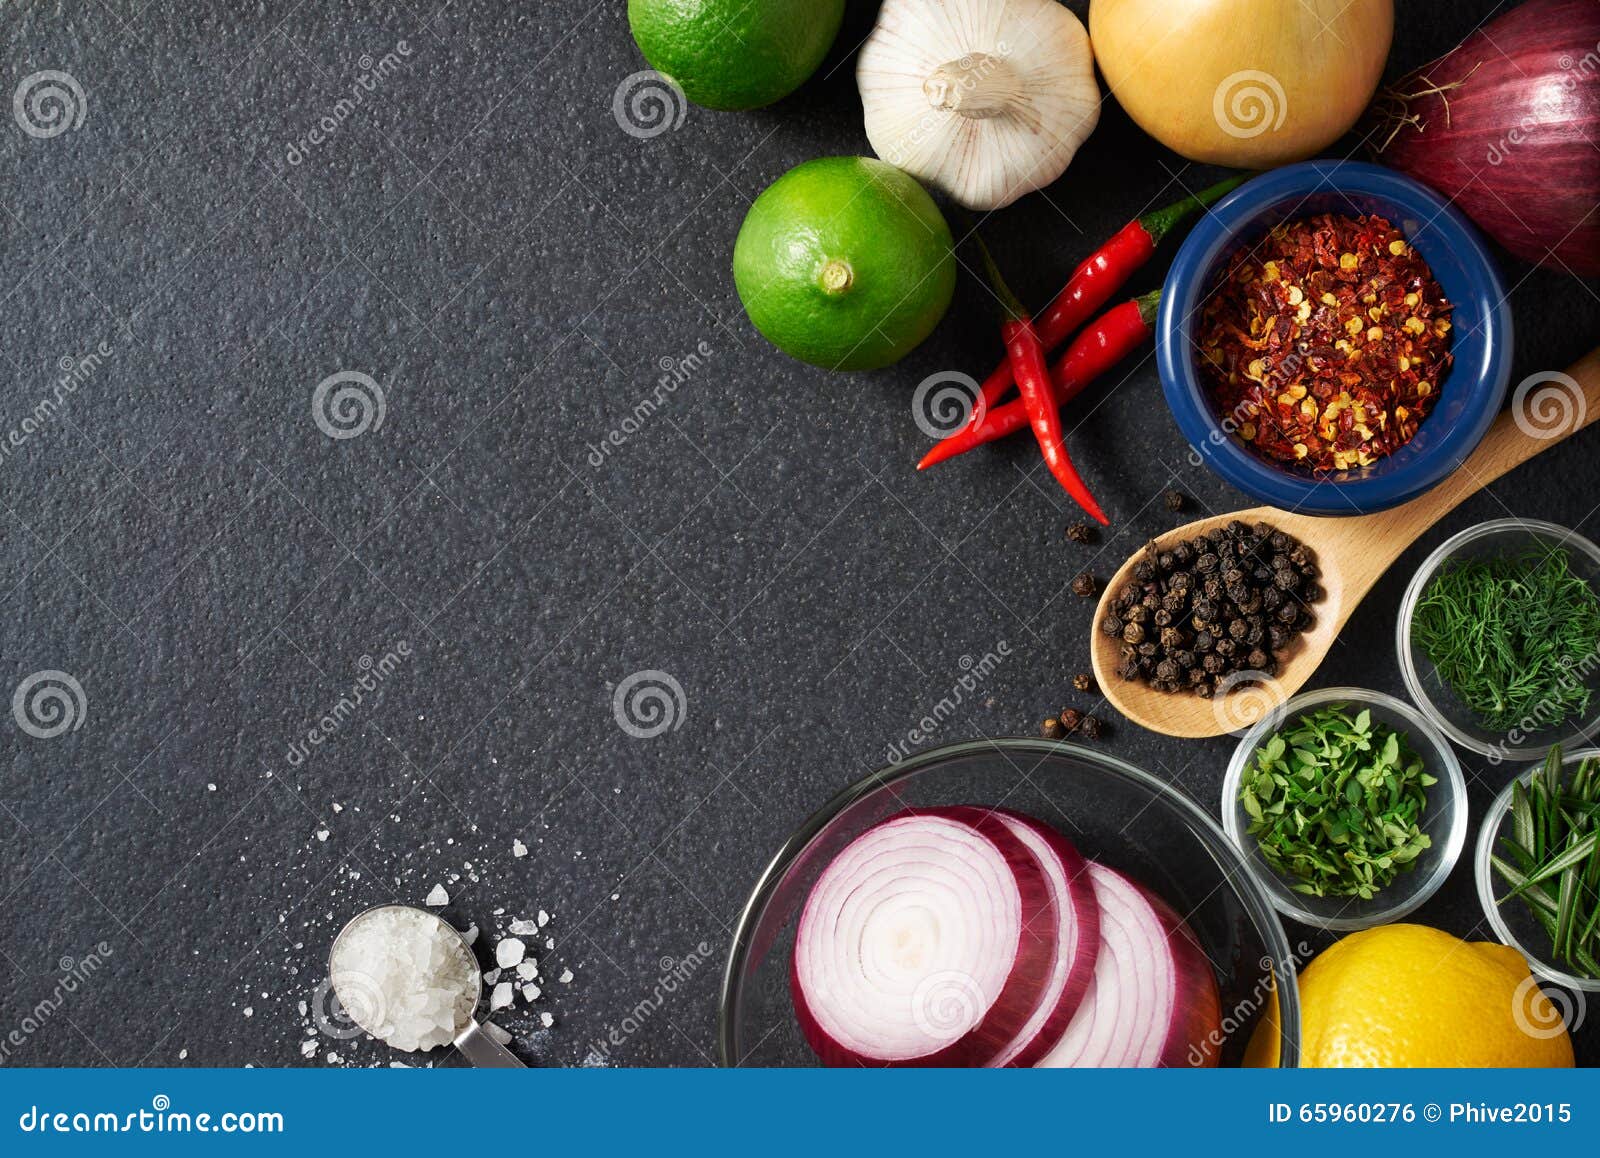 Spices and Food Ingredients on Slate Background Stock Photo - Image of ...